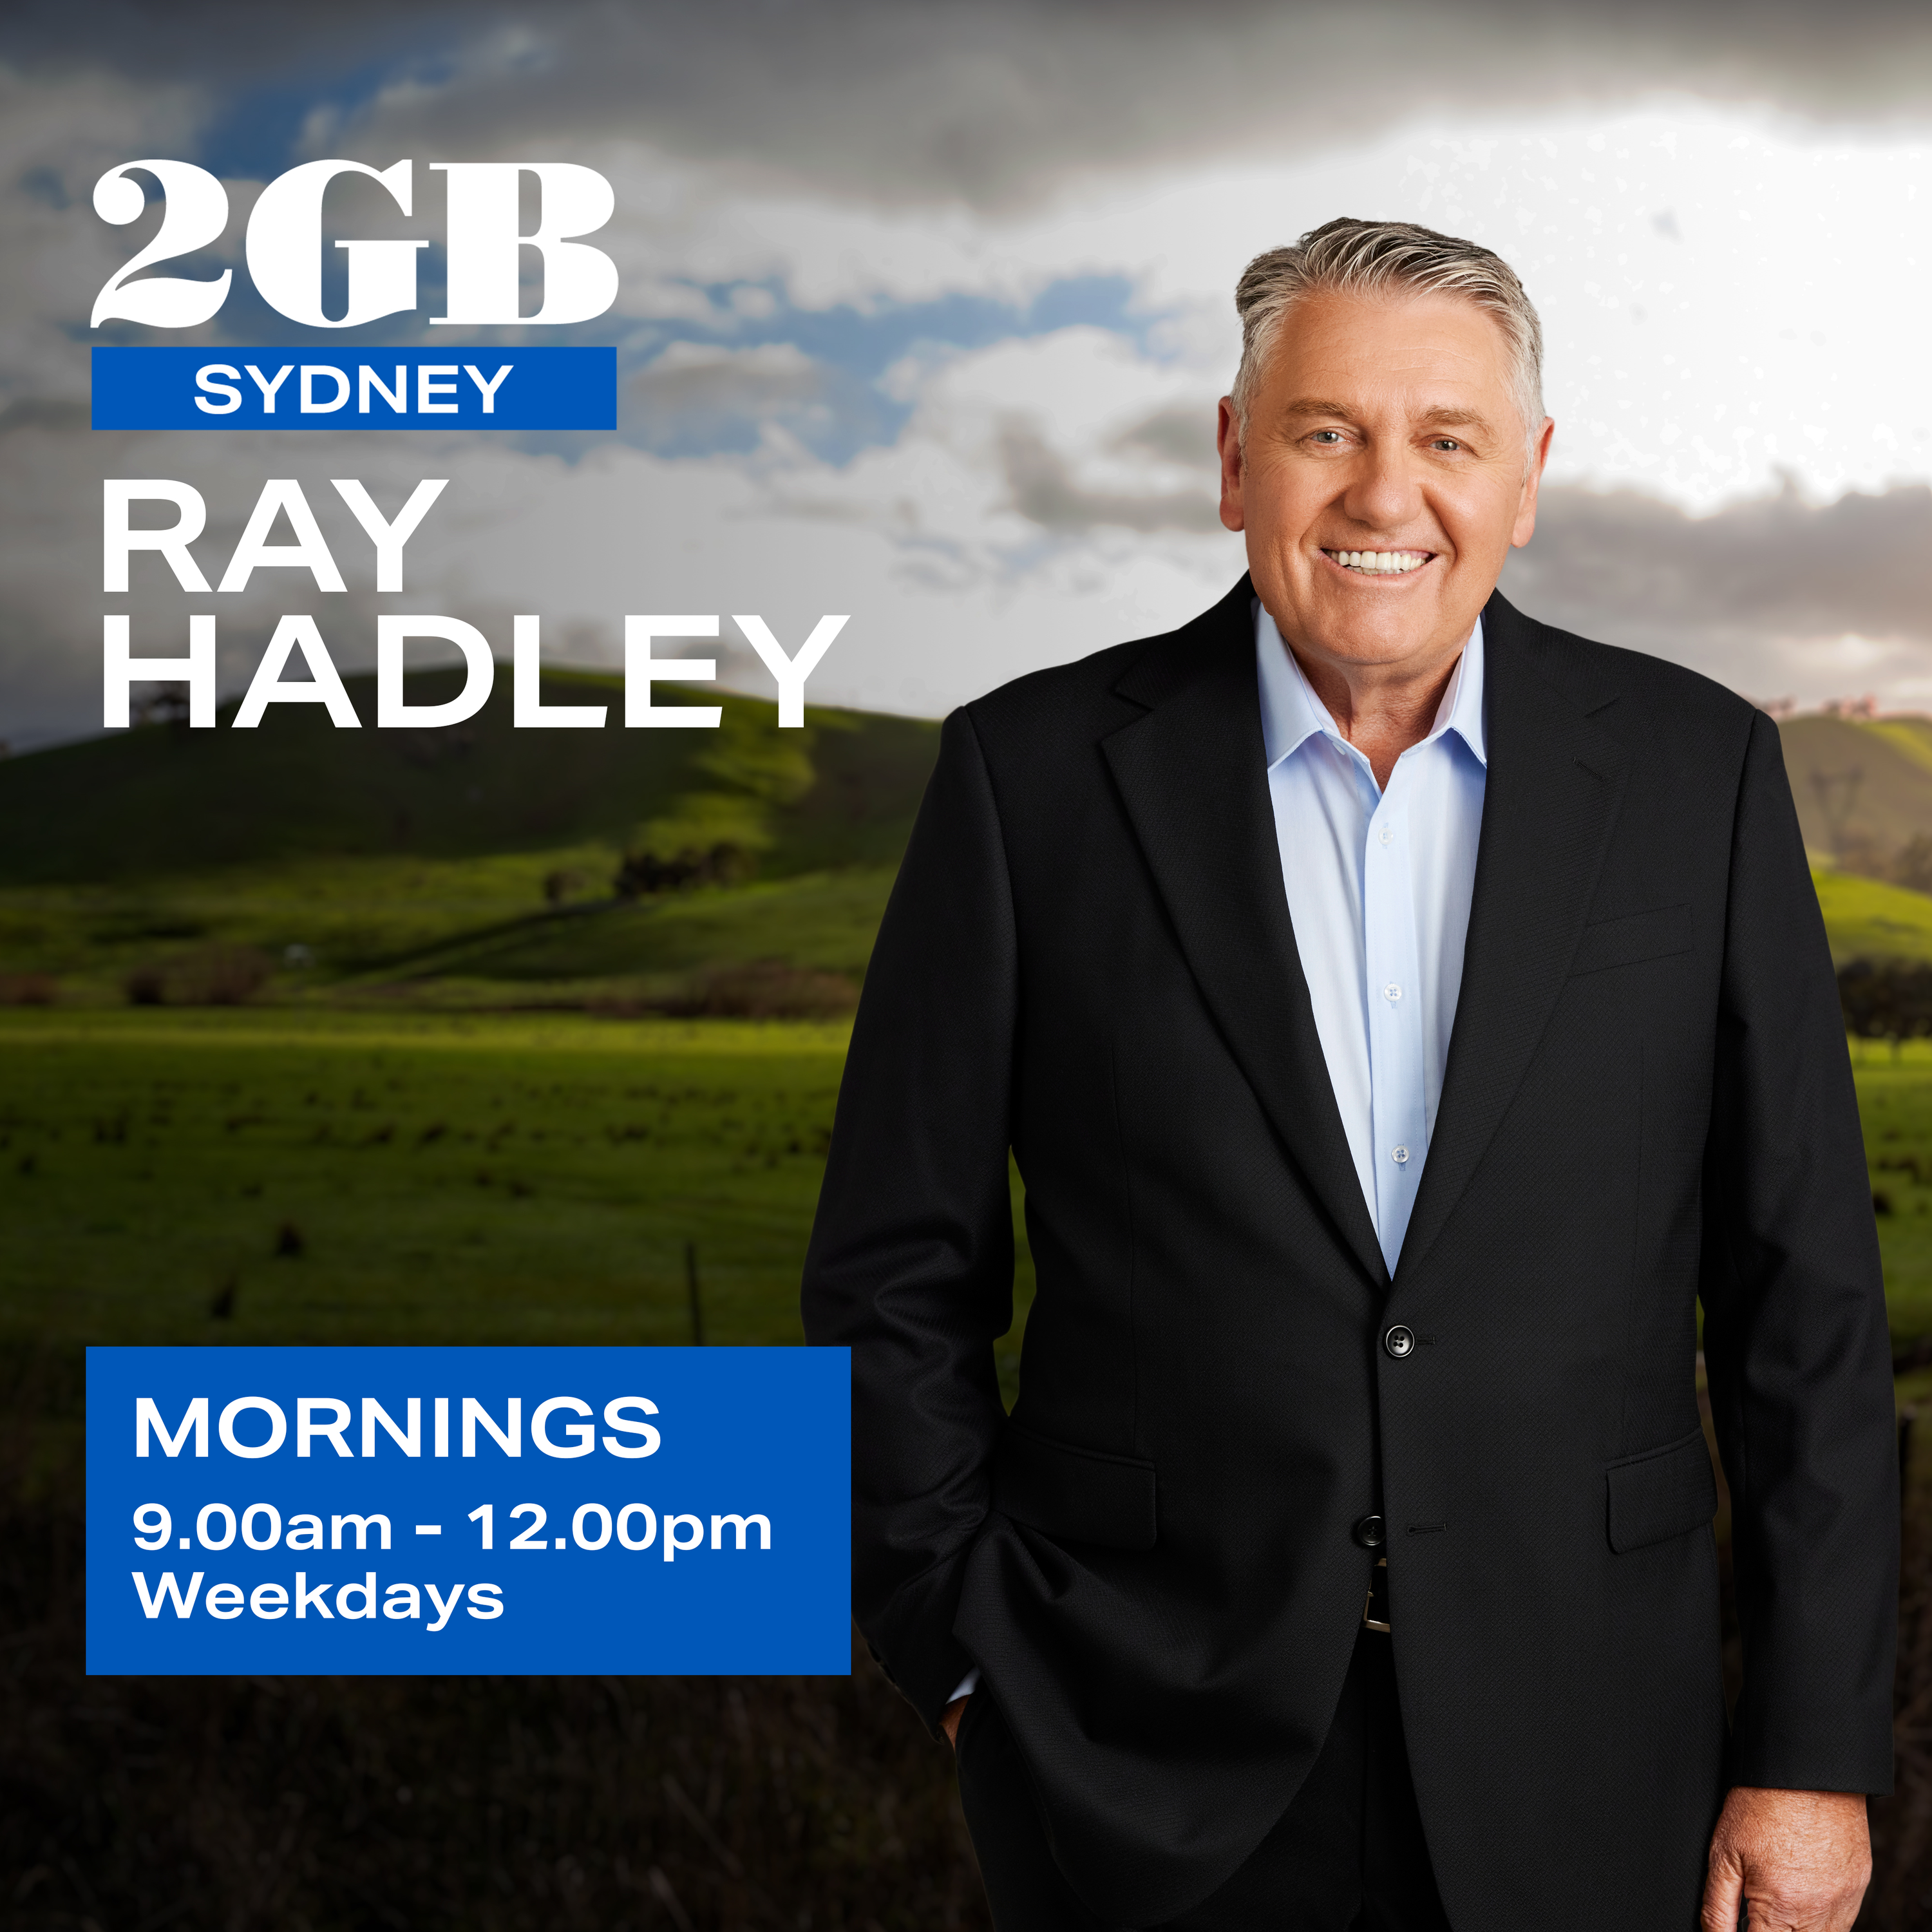 'Does this mean something significant in my life?' Ray Hadley feels a 'flush' live on air